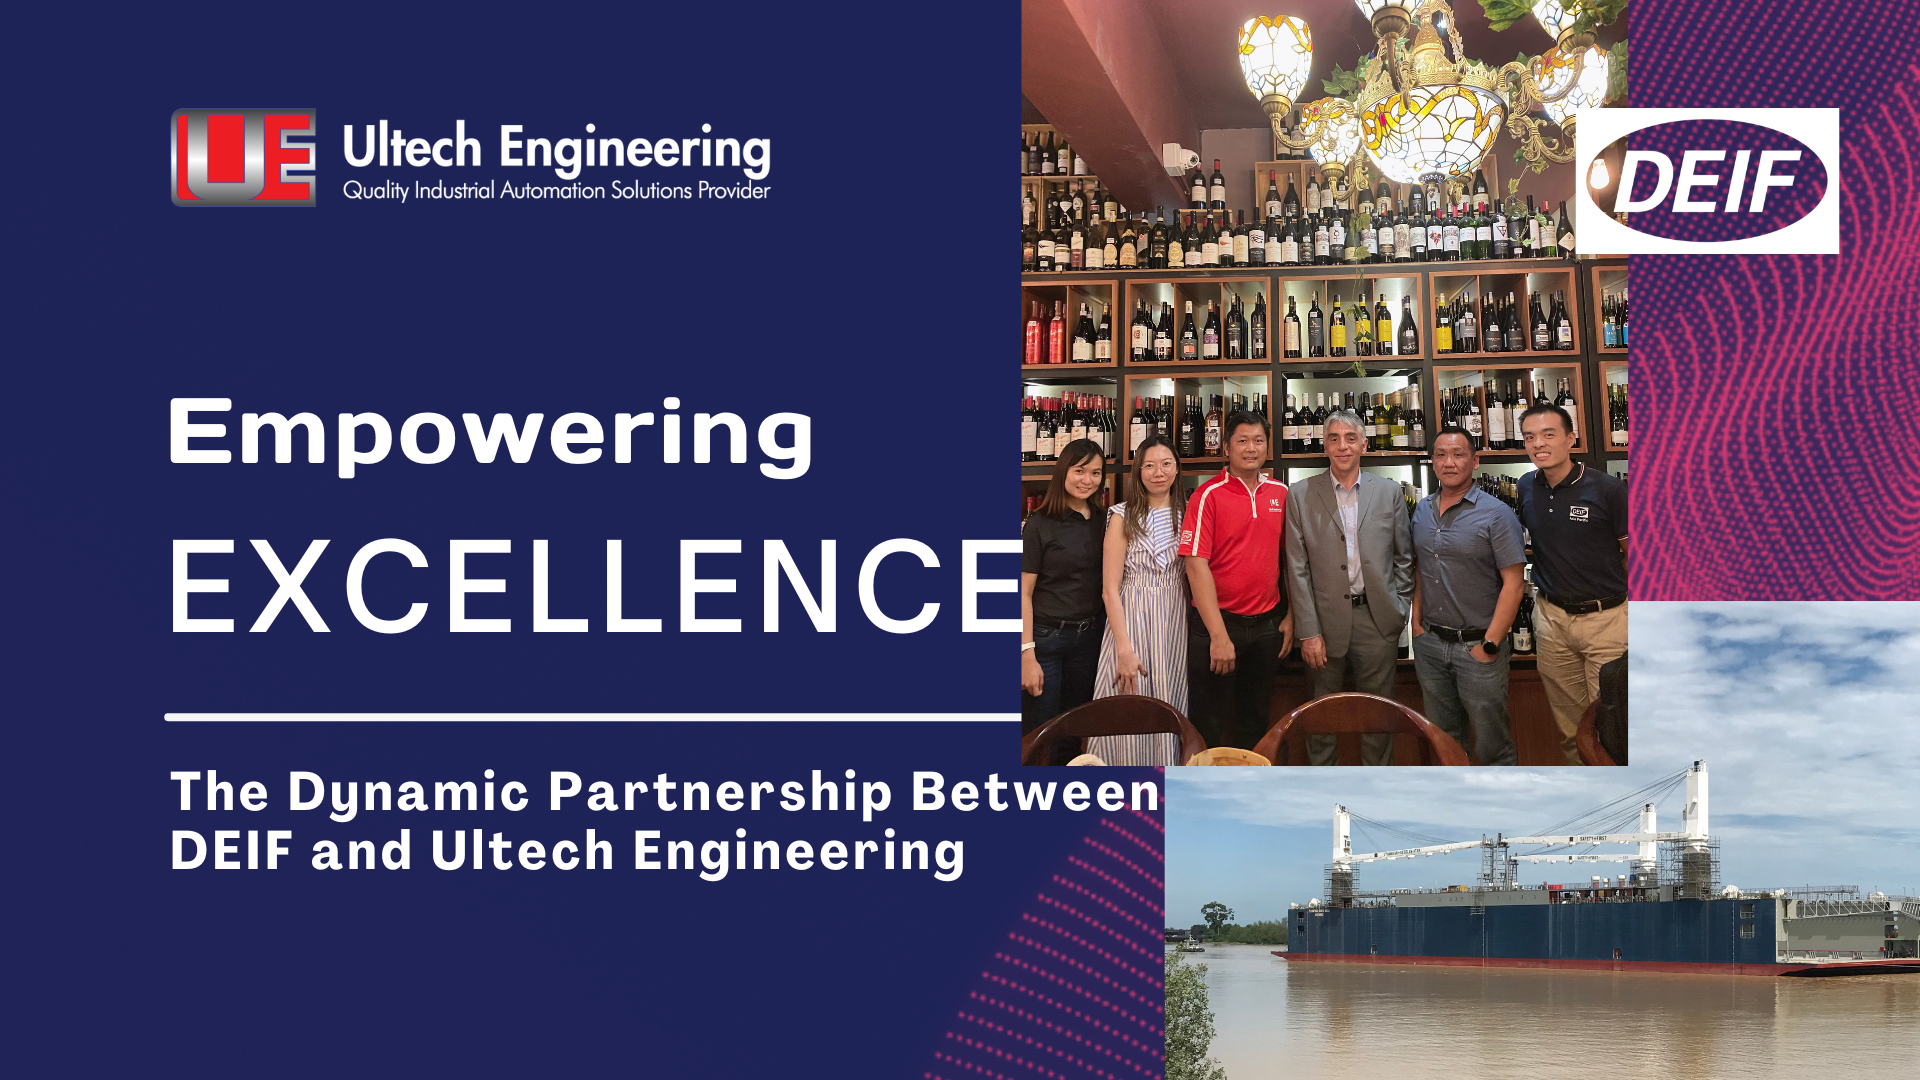 Empowering Excellence: The Dynamic Partnership Between DEIF and Ultech Engineering